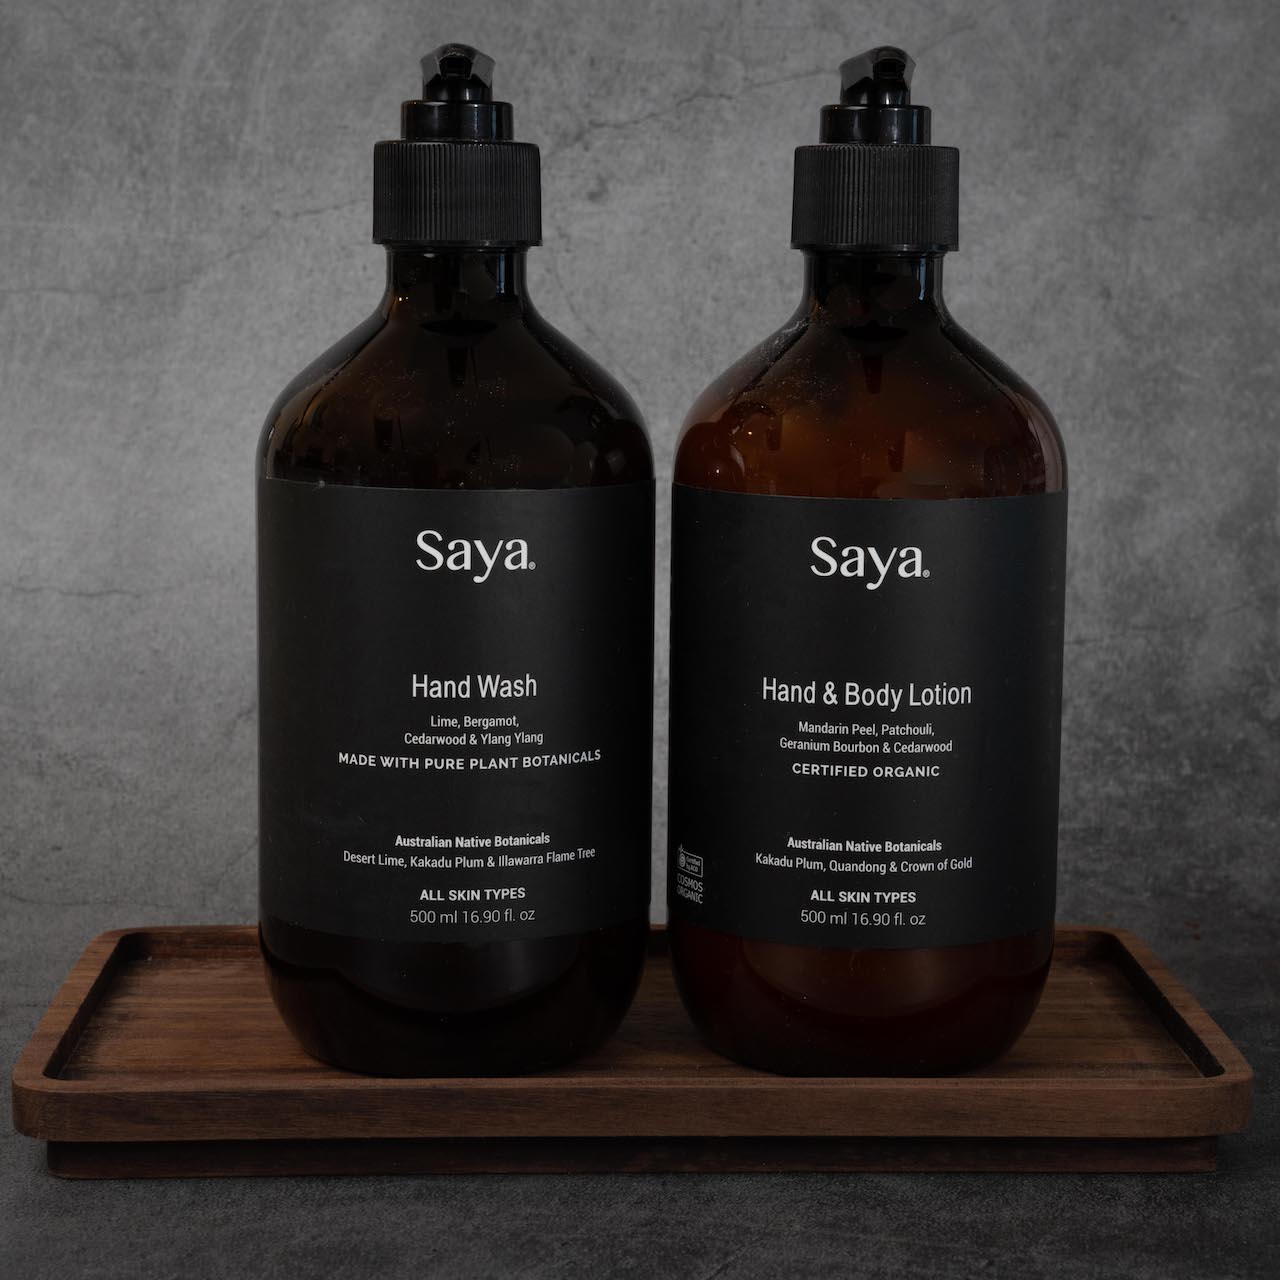 Two large, dark colored glass bottles sitting next to each other, each with a black pump-top and a black label. The white lettering on the bottle on the left reads " Saya Hand Wash, Lime, Bergamot, Cedarwood, & Ylang Ylang, Made with pure plant botanicals, Australian Native Botanicals, Desert Lime, Kakadu Plum & Illawarra Flame Tree, All skin types, 500ml/16.9 fl oz". The white lettering on the bottle on the right reads, "Saya Hand & Body Lotion, Mandarin Peel, Patchouli, Geranium Bourbon, & Cedarwood, Cert